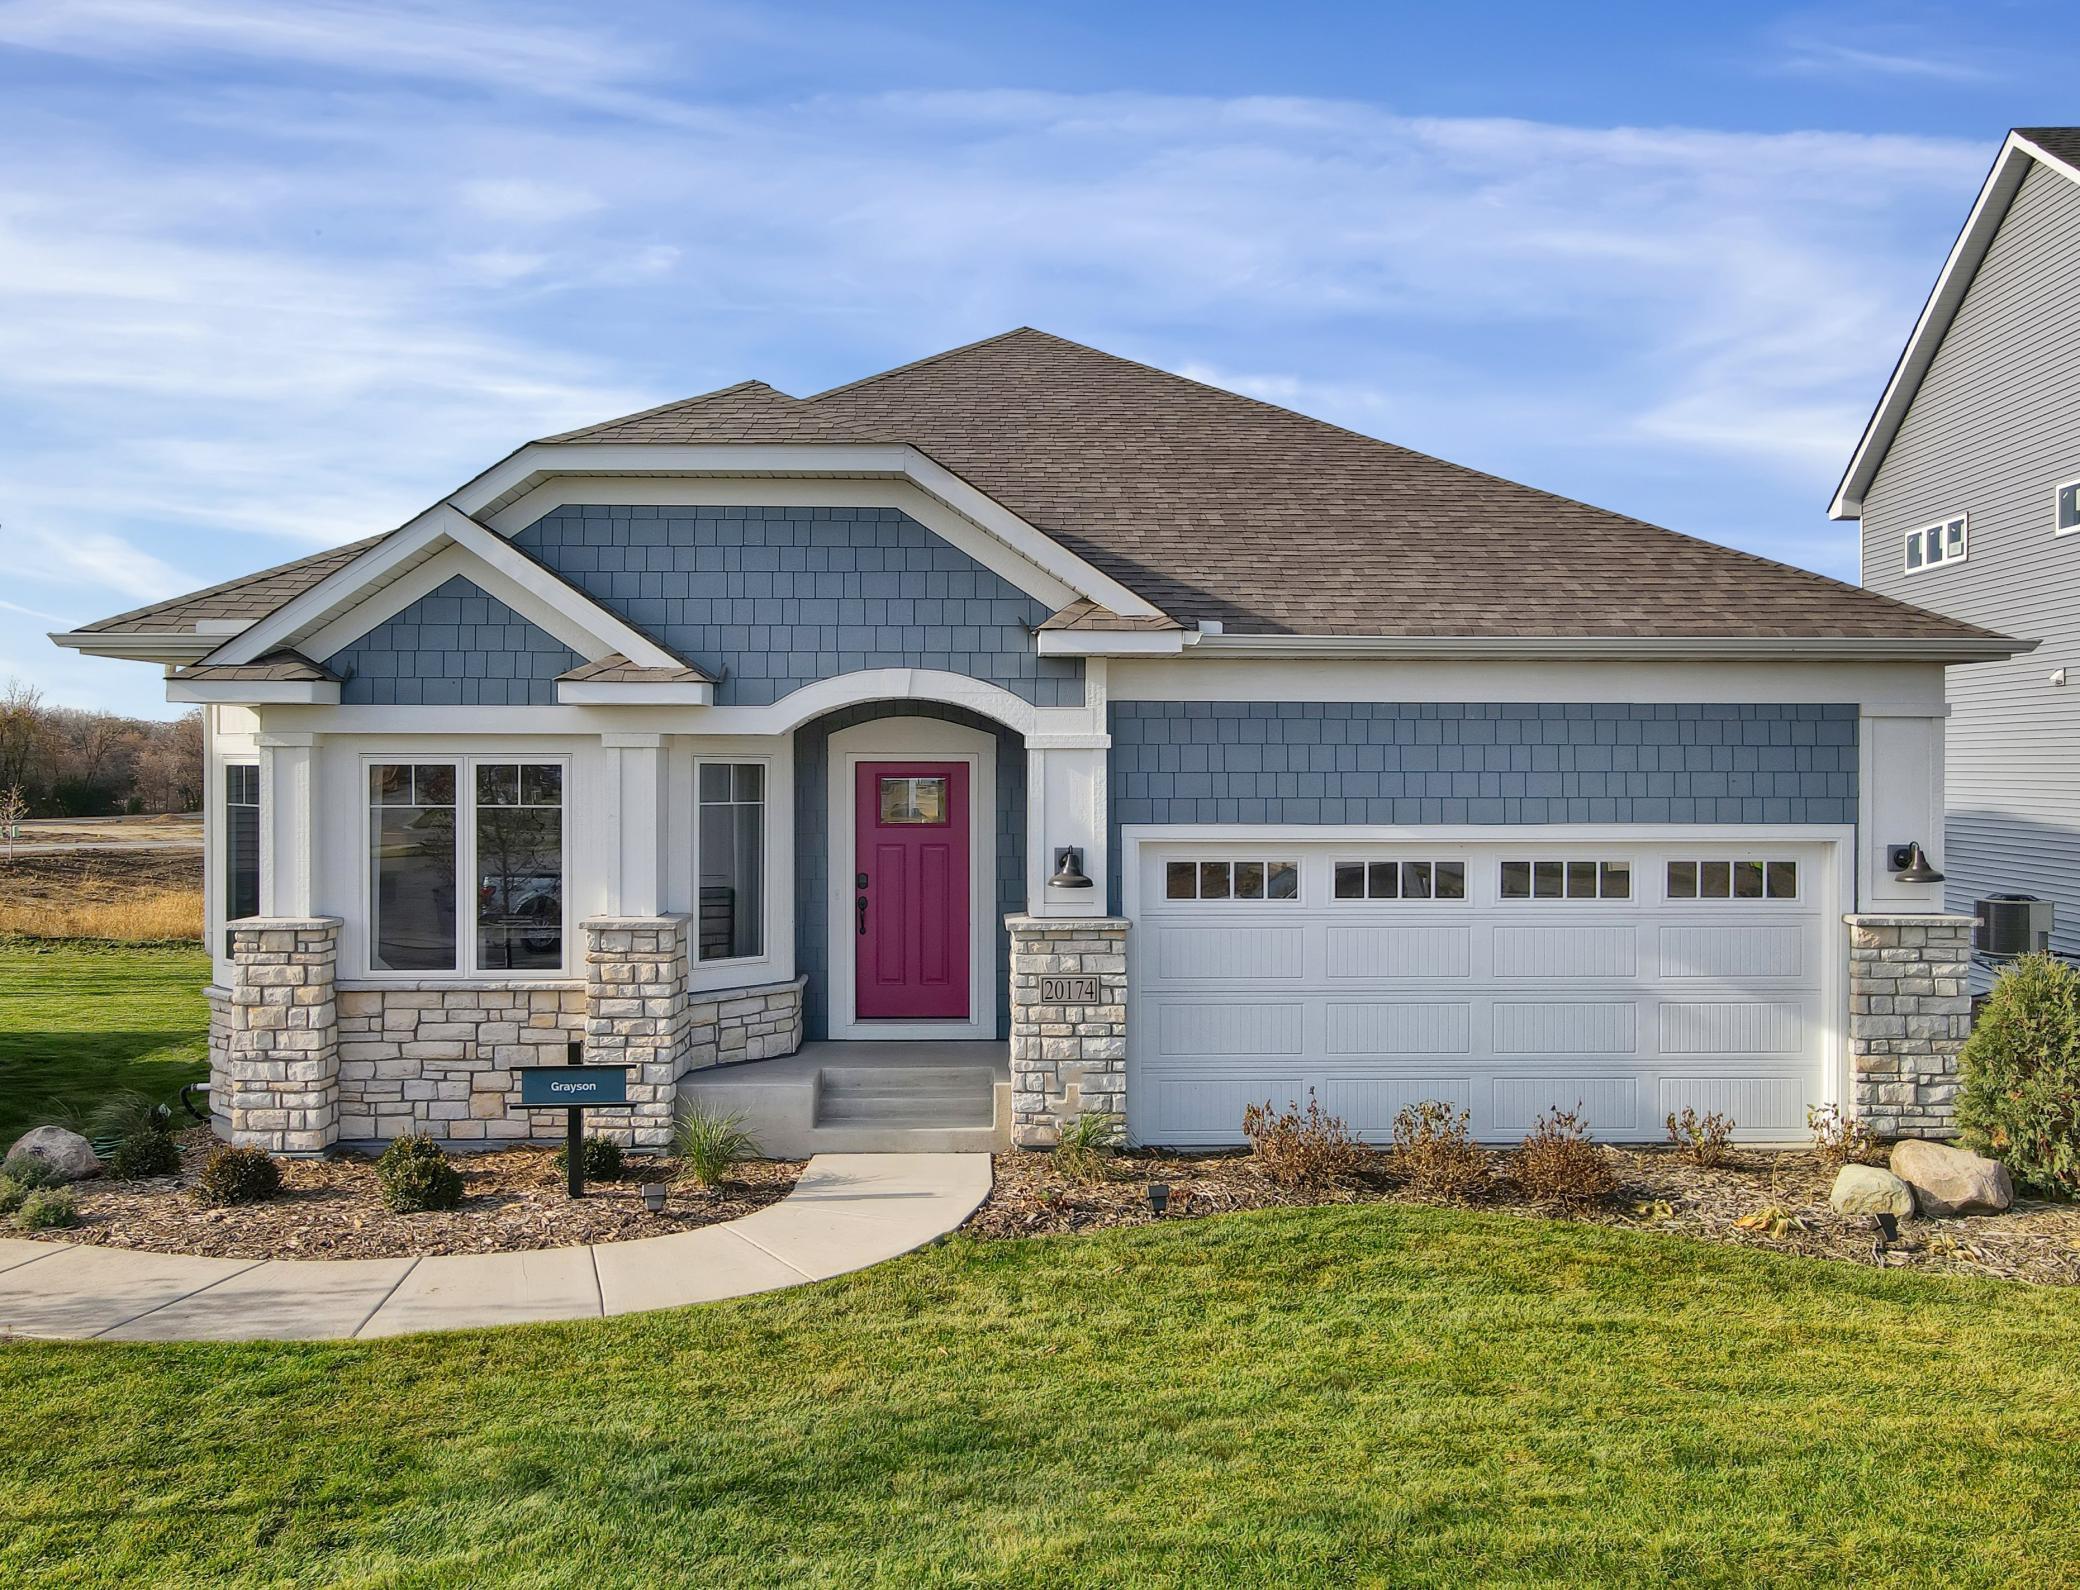 Model HOME and not for sale but here to show you what you can build in our community called Rush Creek Reserve. Come visit, fall in love, and call it home. Pick all the designer finishes to your taste when you build a new home today. Popular home!